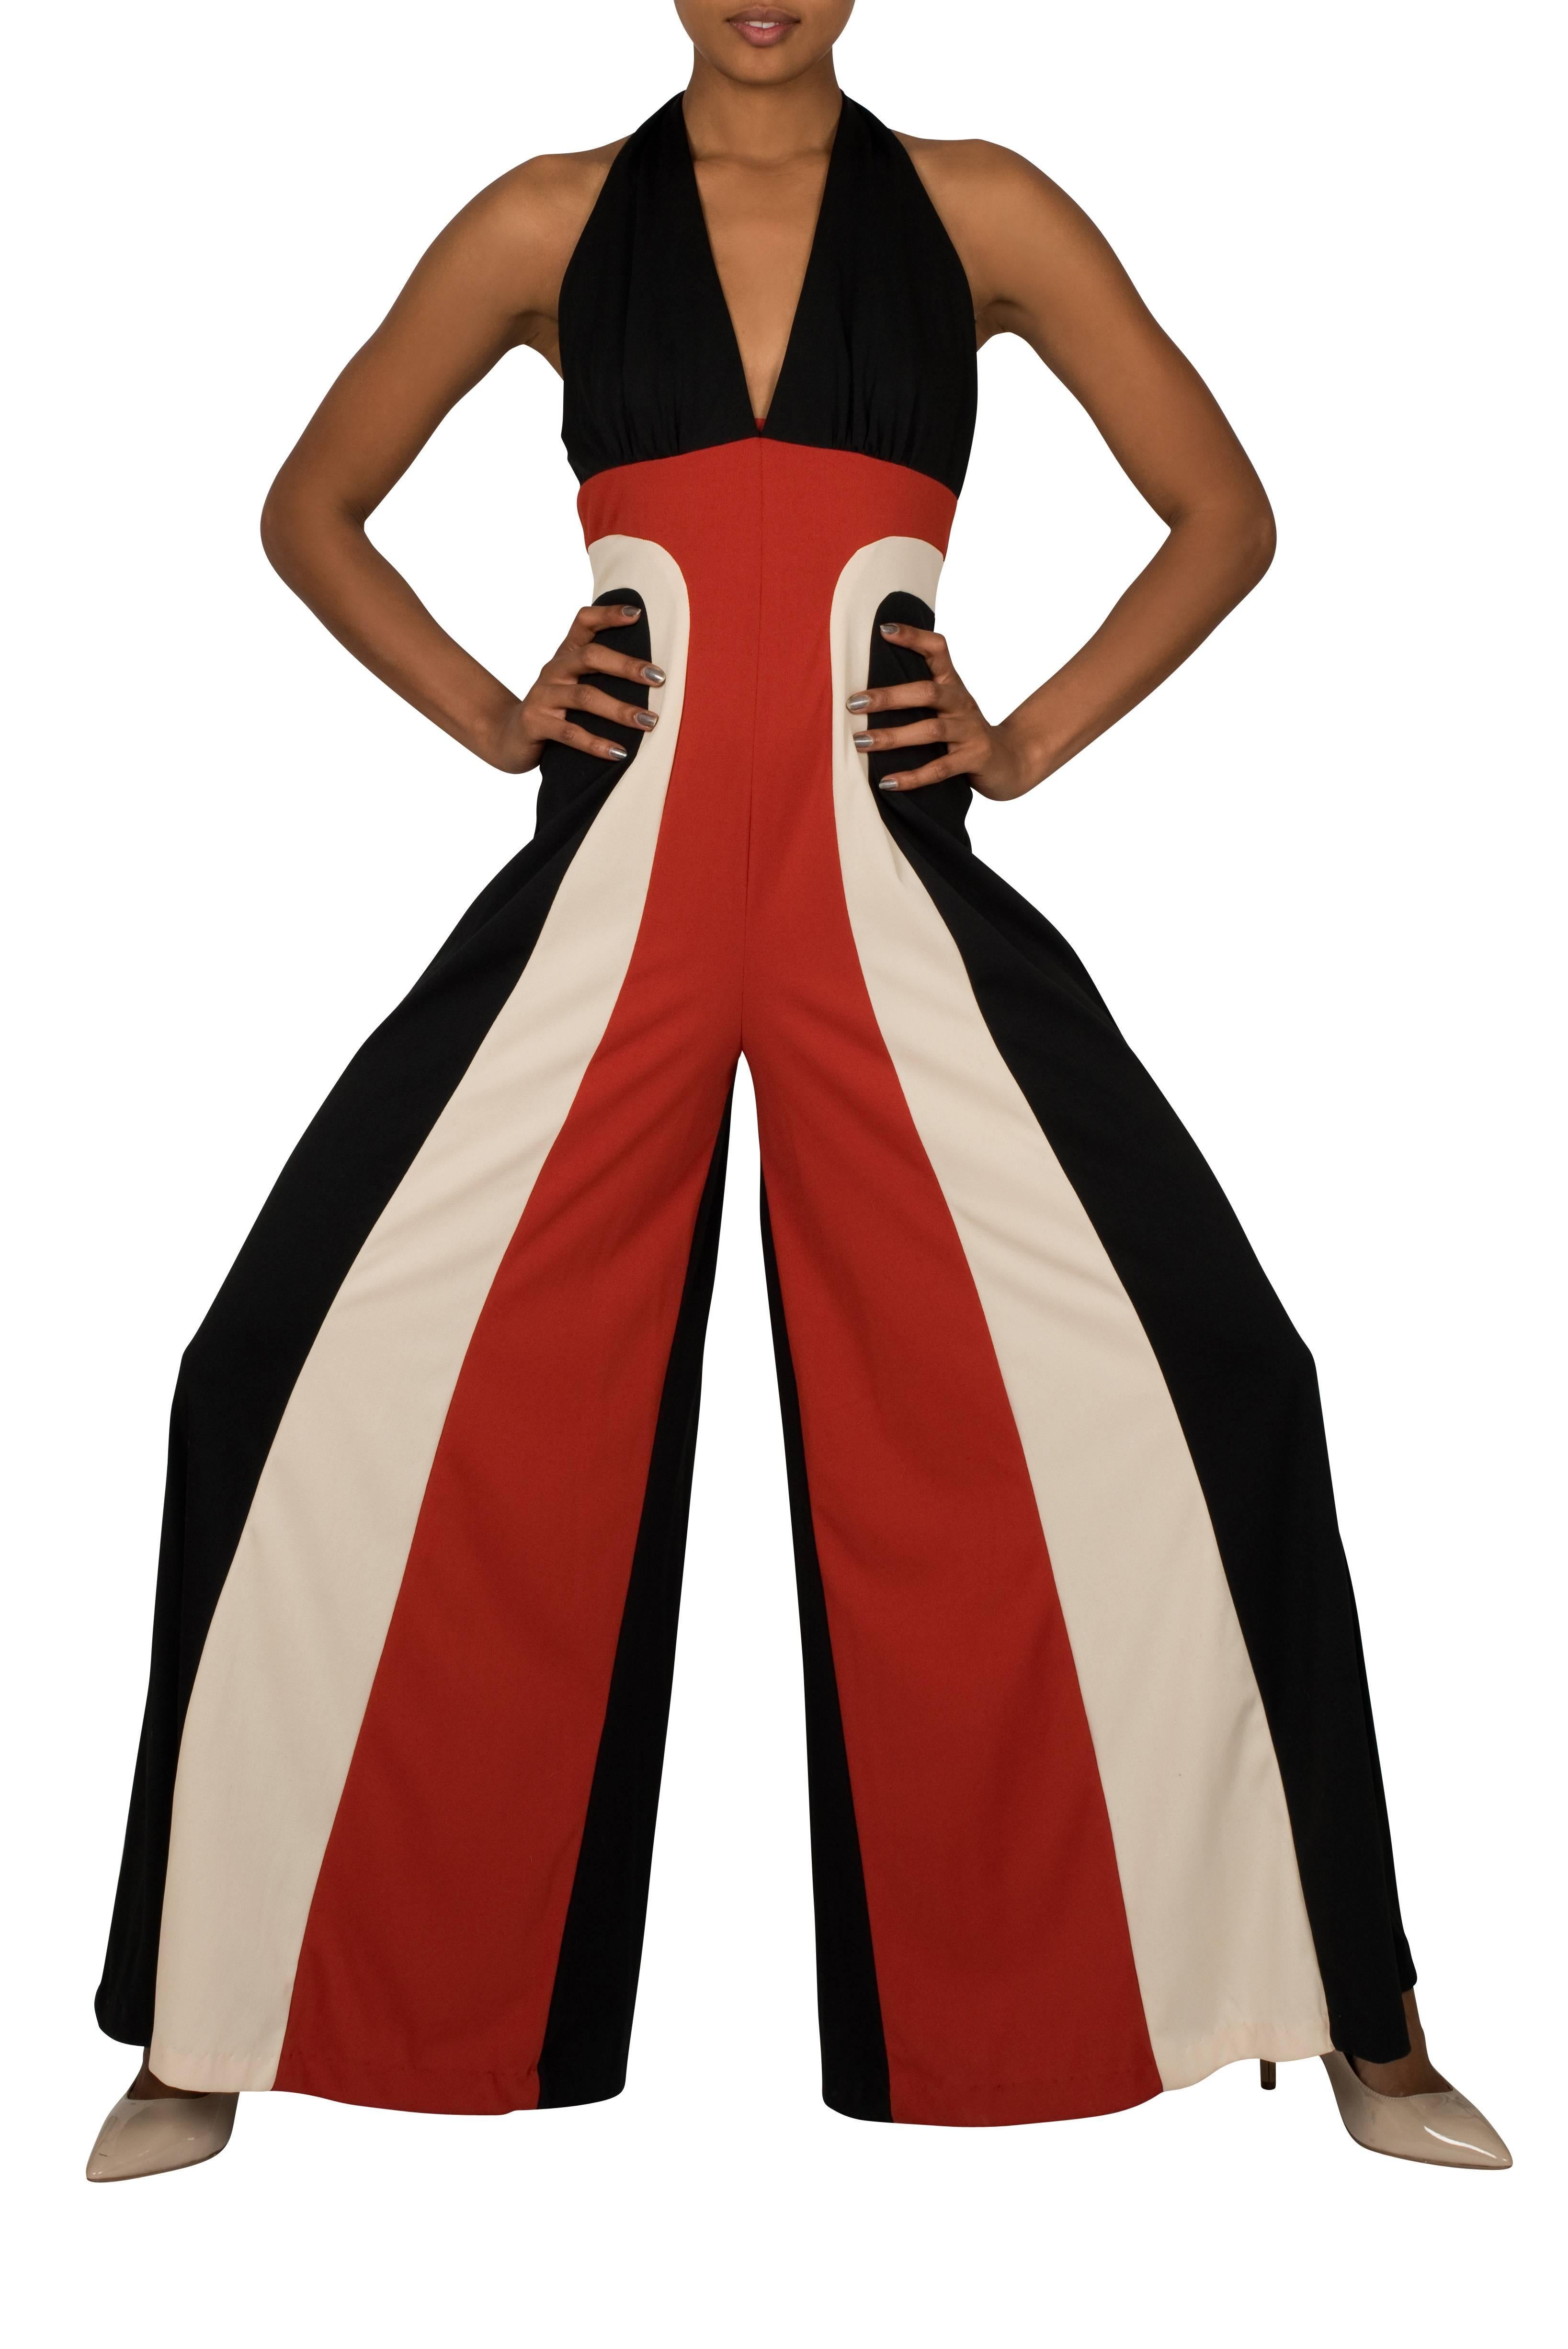 Stunning statement racing stripe jumpsuit from the 1970's. Featuring a bold design with red and ivory stripes inserted in the centre front of the black polyester jersey which ties at the nape of the neck forming the halter neck shape. This jumpsuit